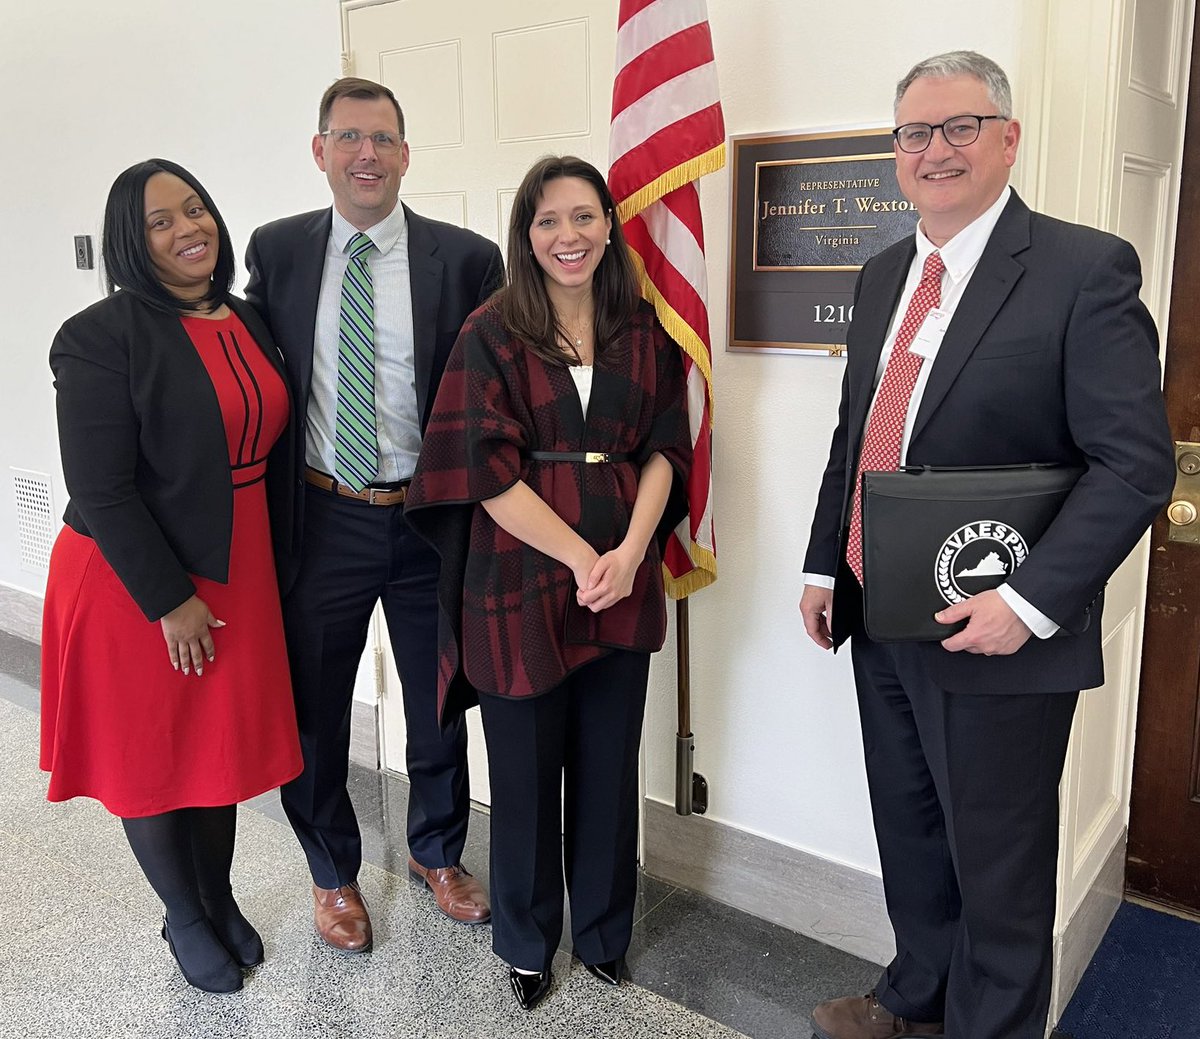 Thrilled to have spent time w/ @S_Bevel and @jmatherly on Capitol Hill, where we united as principals to advocate Congress to address the widespread shortages among teachers and principals. @VaPrincipals @NASSP @NAESP